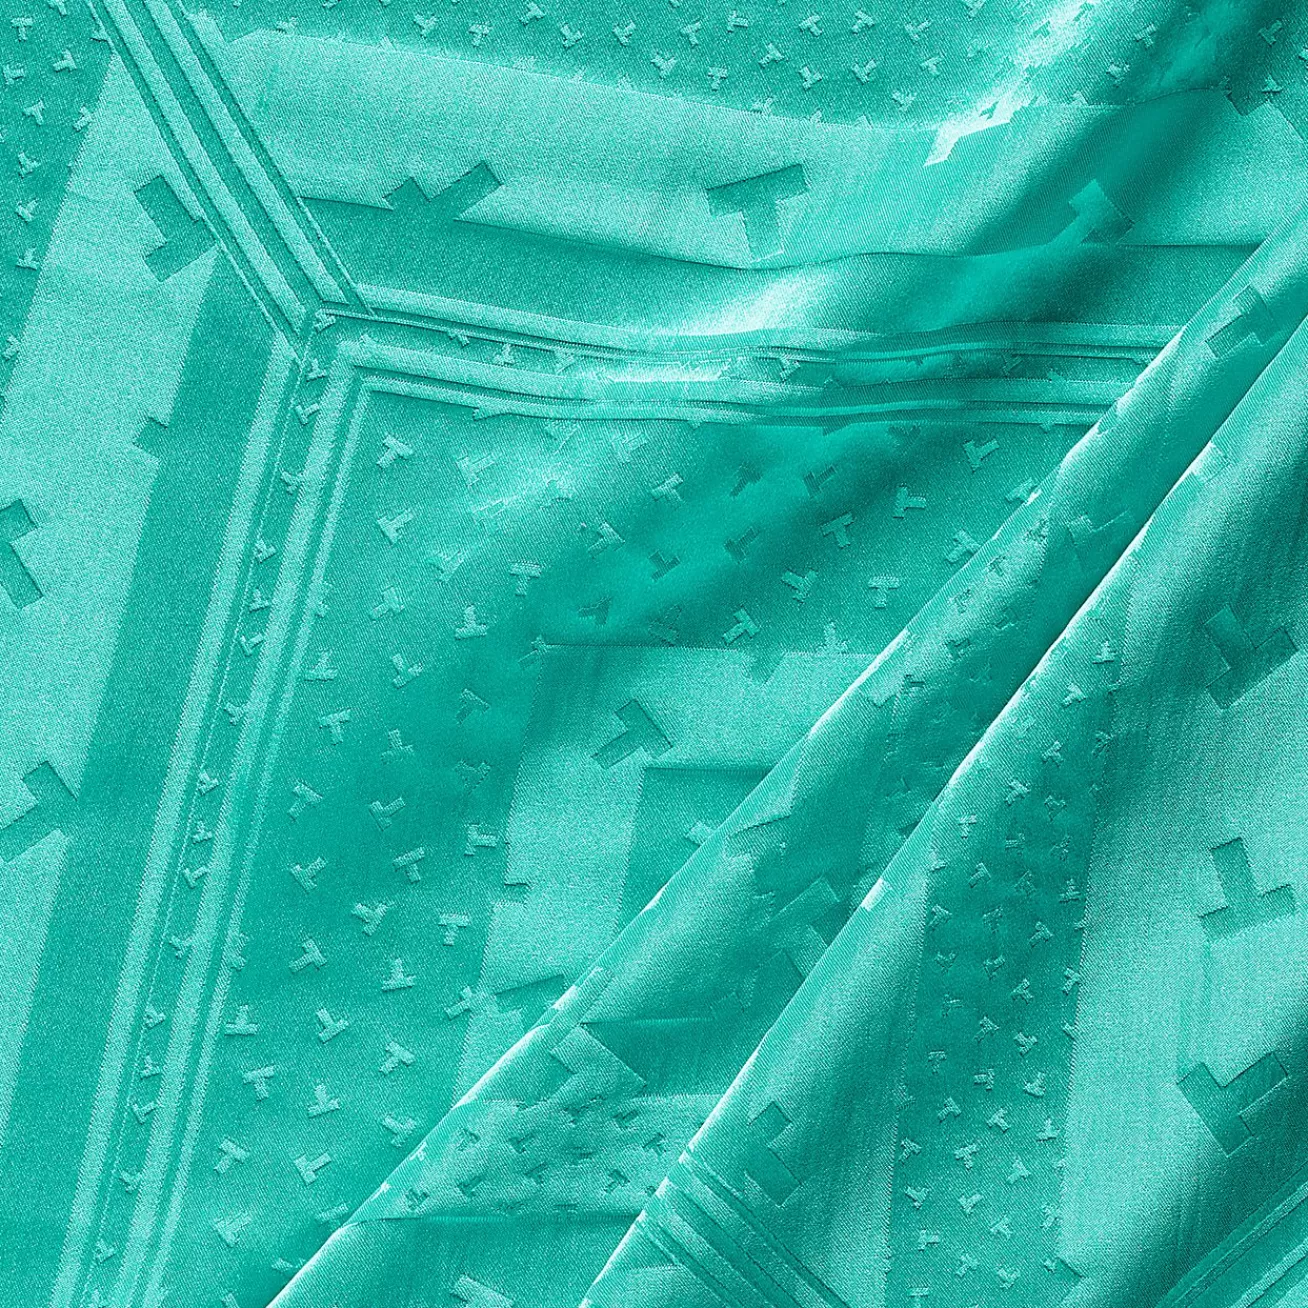 Tiffany & Co. Tiffany T Dancing T Square Scarf in Tiffany Blue® Silk Jacquard | ^Women Tiffany Blue® Gifts | Scarves & Stoles